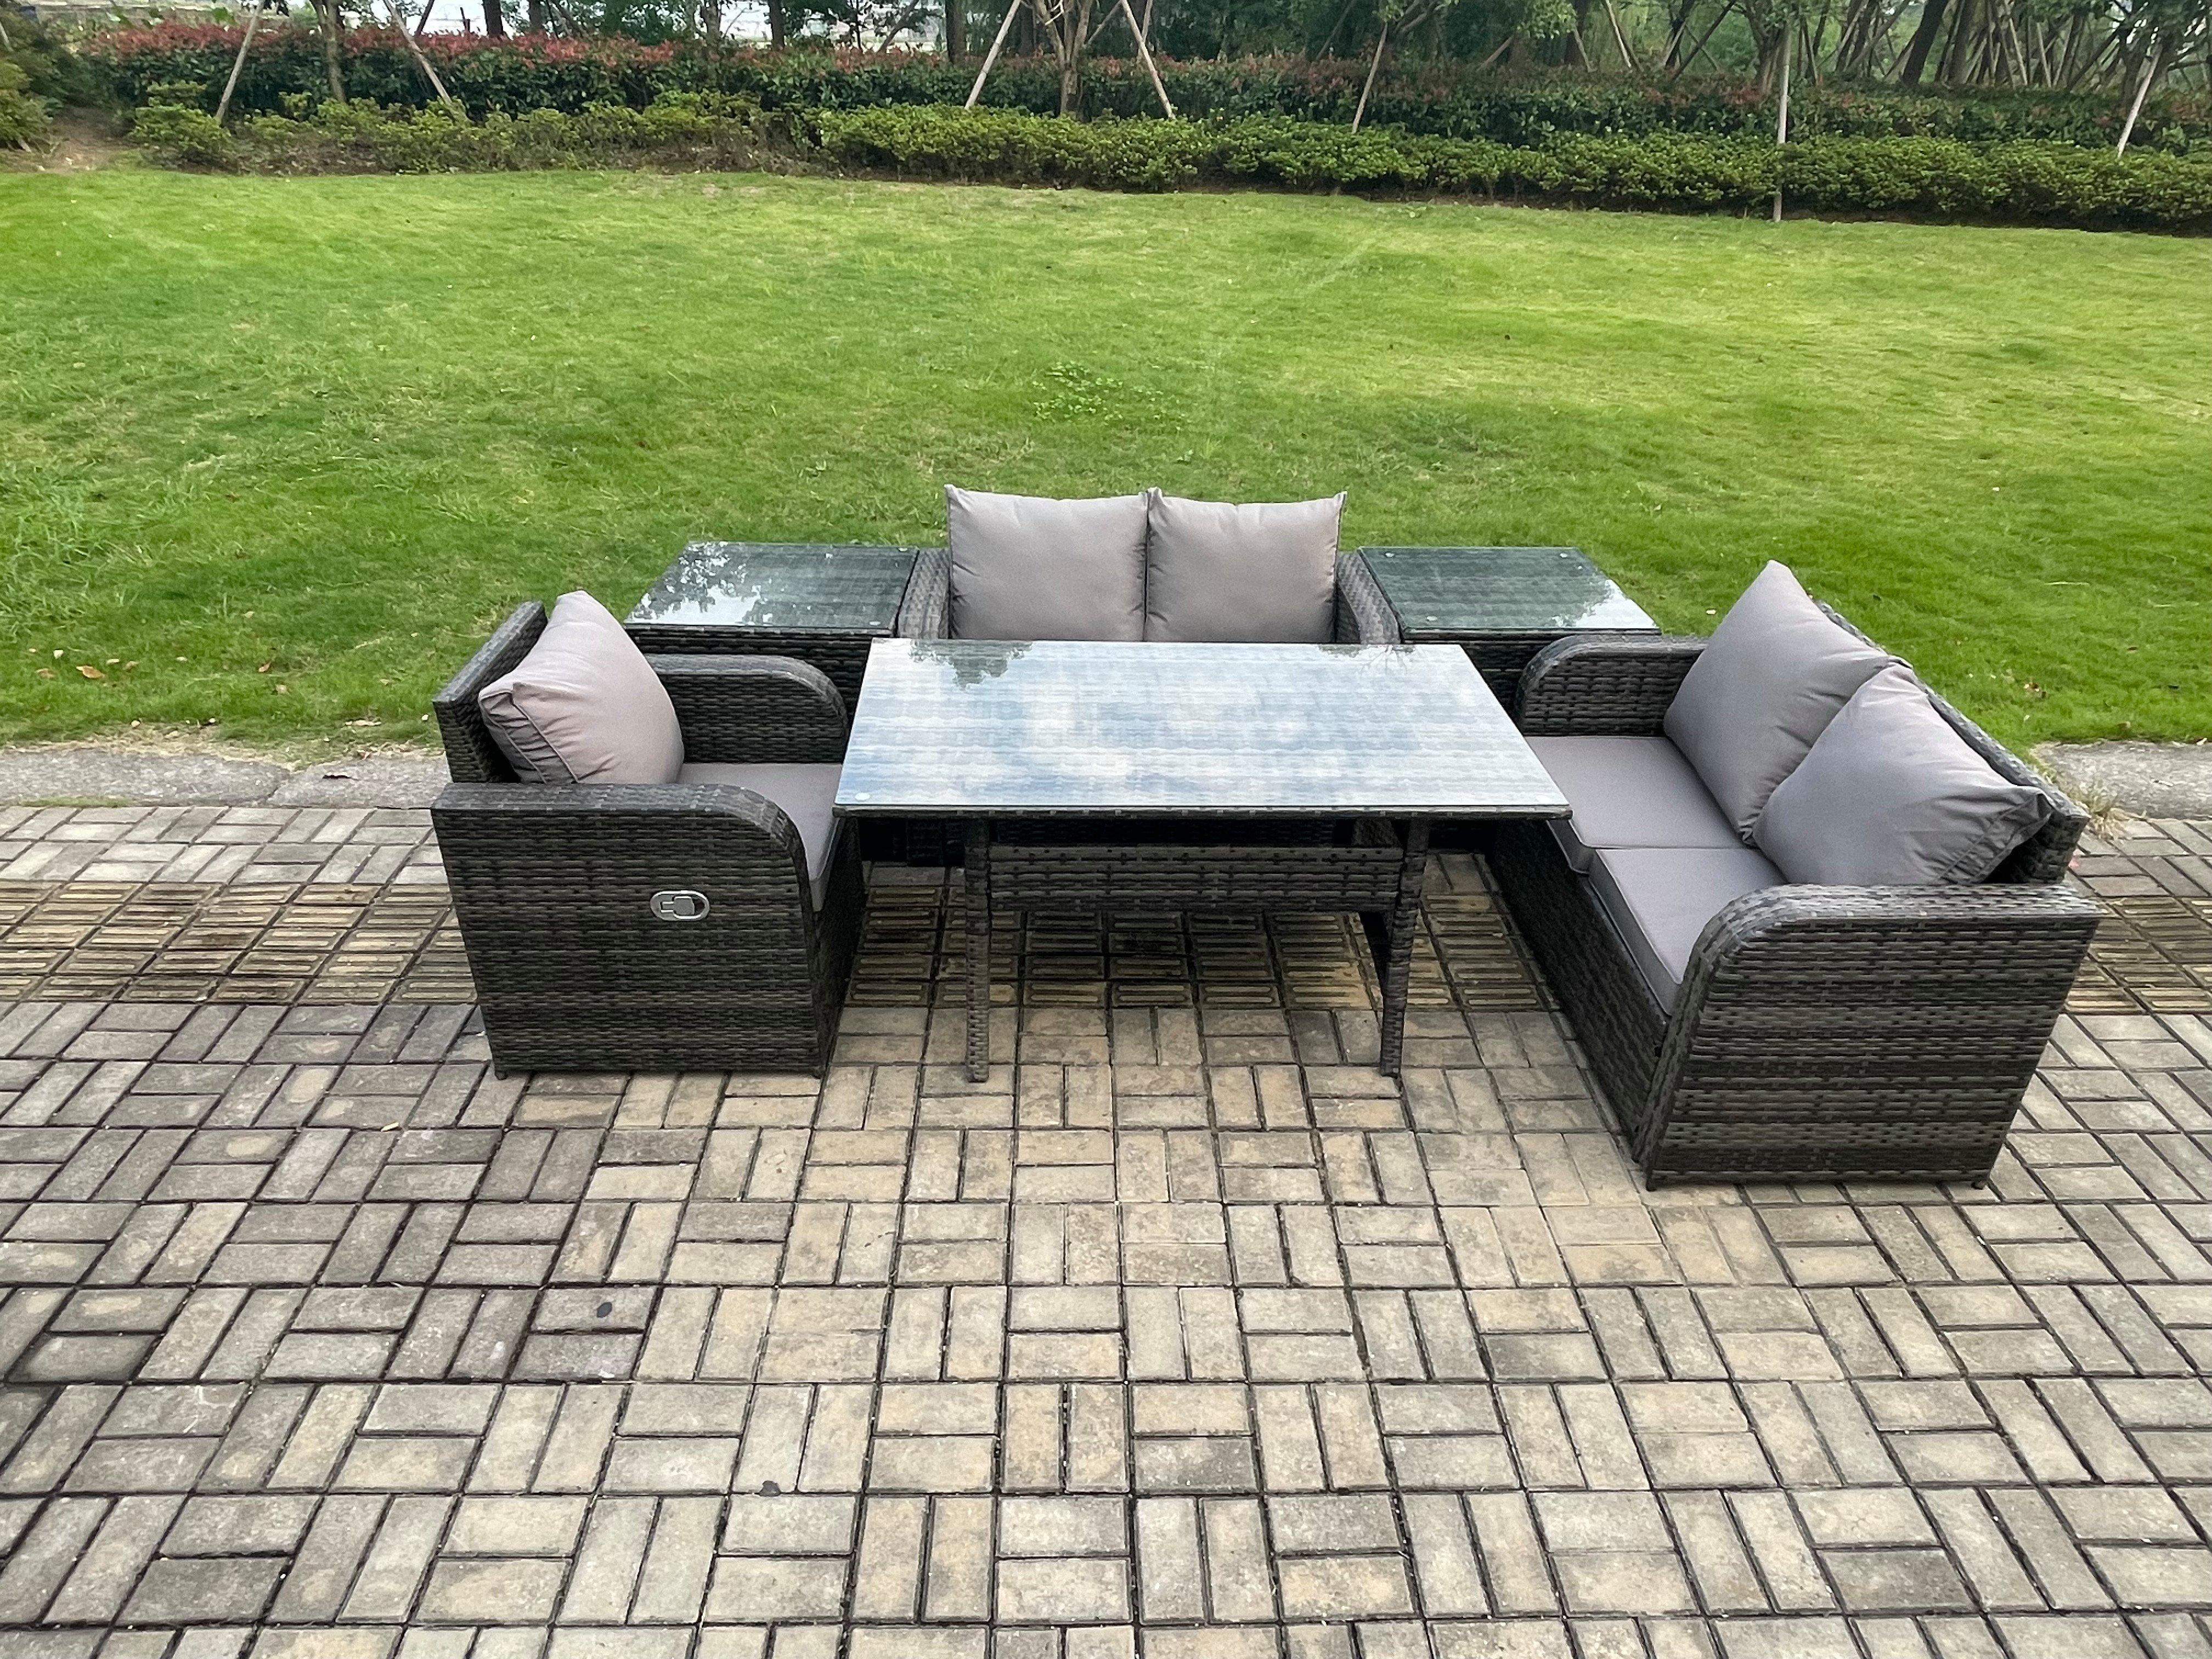 Lounge Rattan Sofa Set Outdoor Garden Furniture Oblong Rectangular Dining Table With Chairs 2 Side T